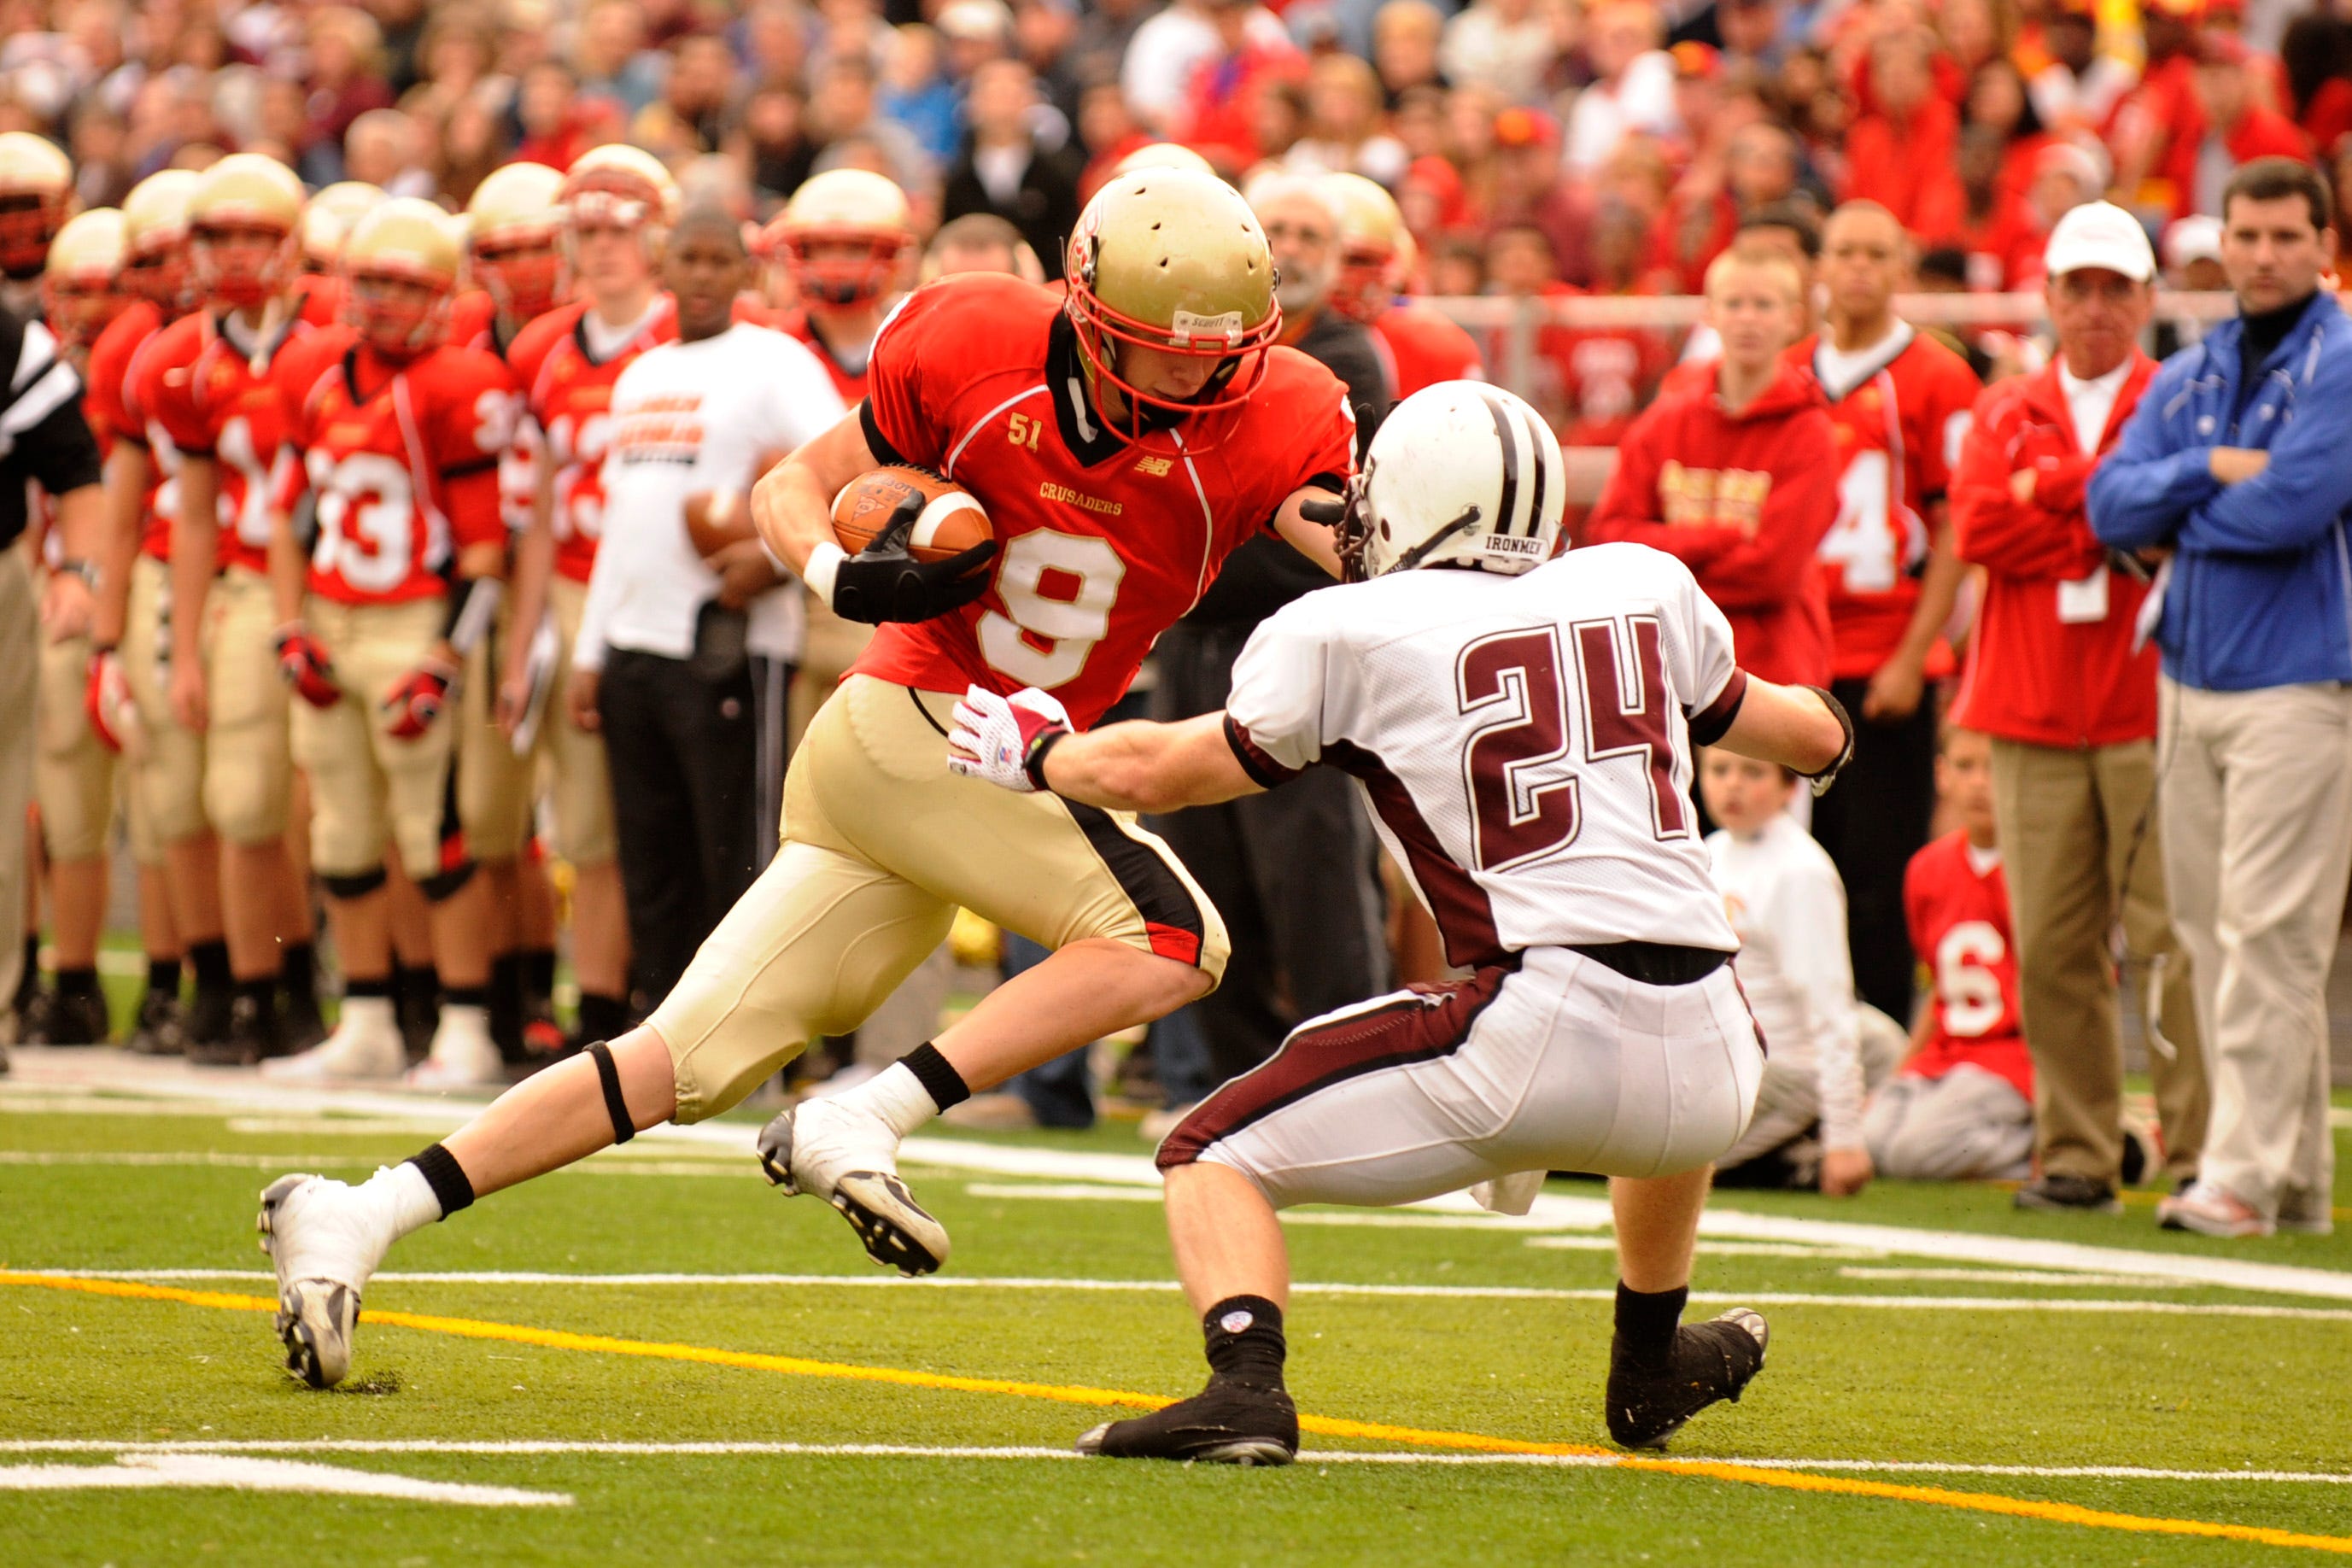 Bergen Catholic-Don Bosco football: Inside the numbers, series history